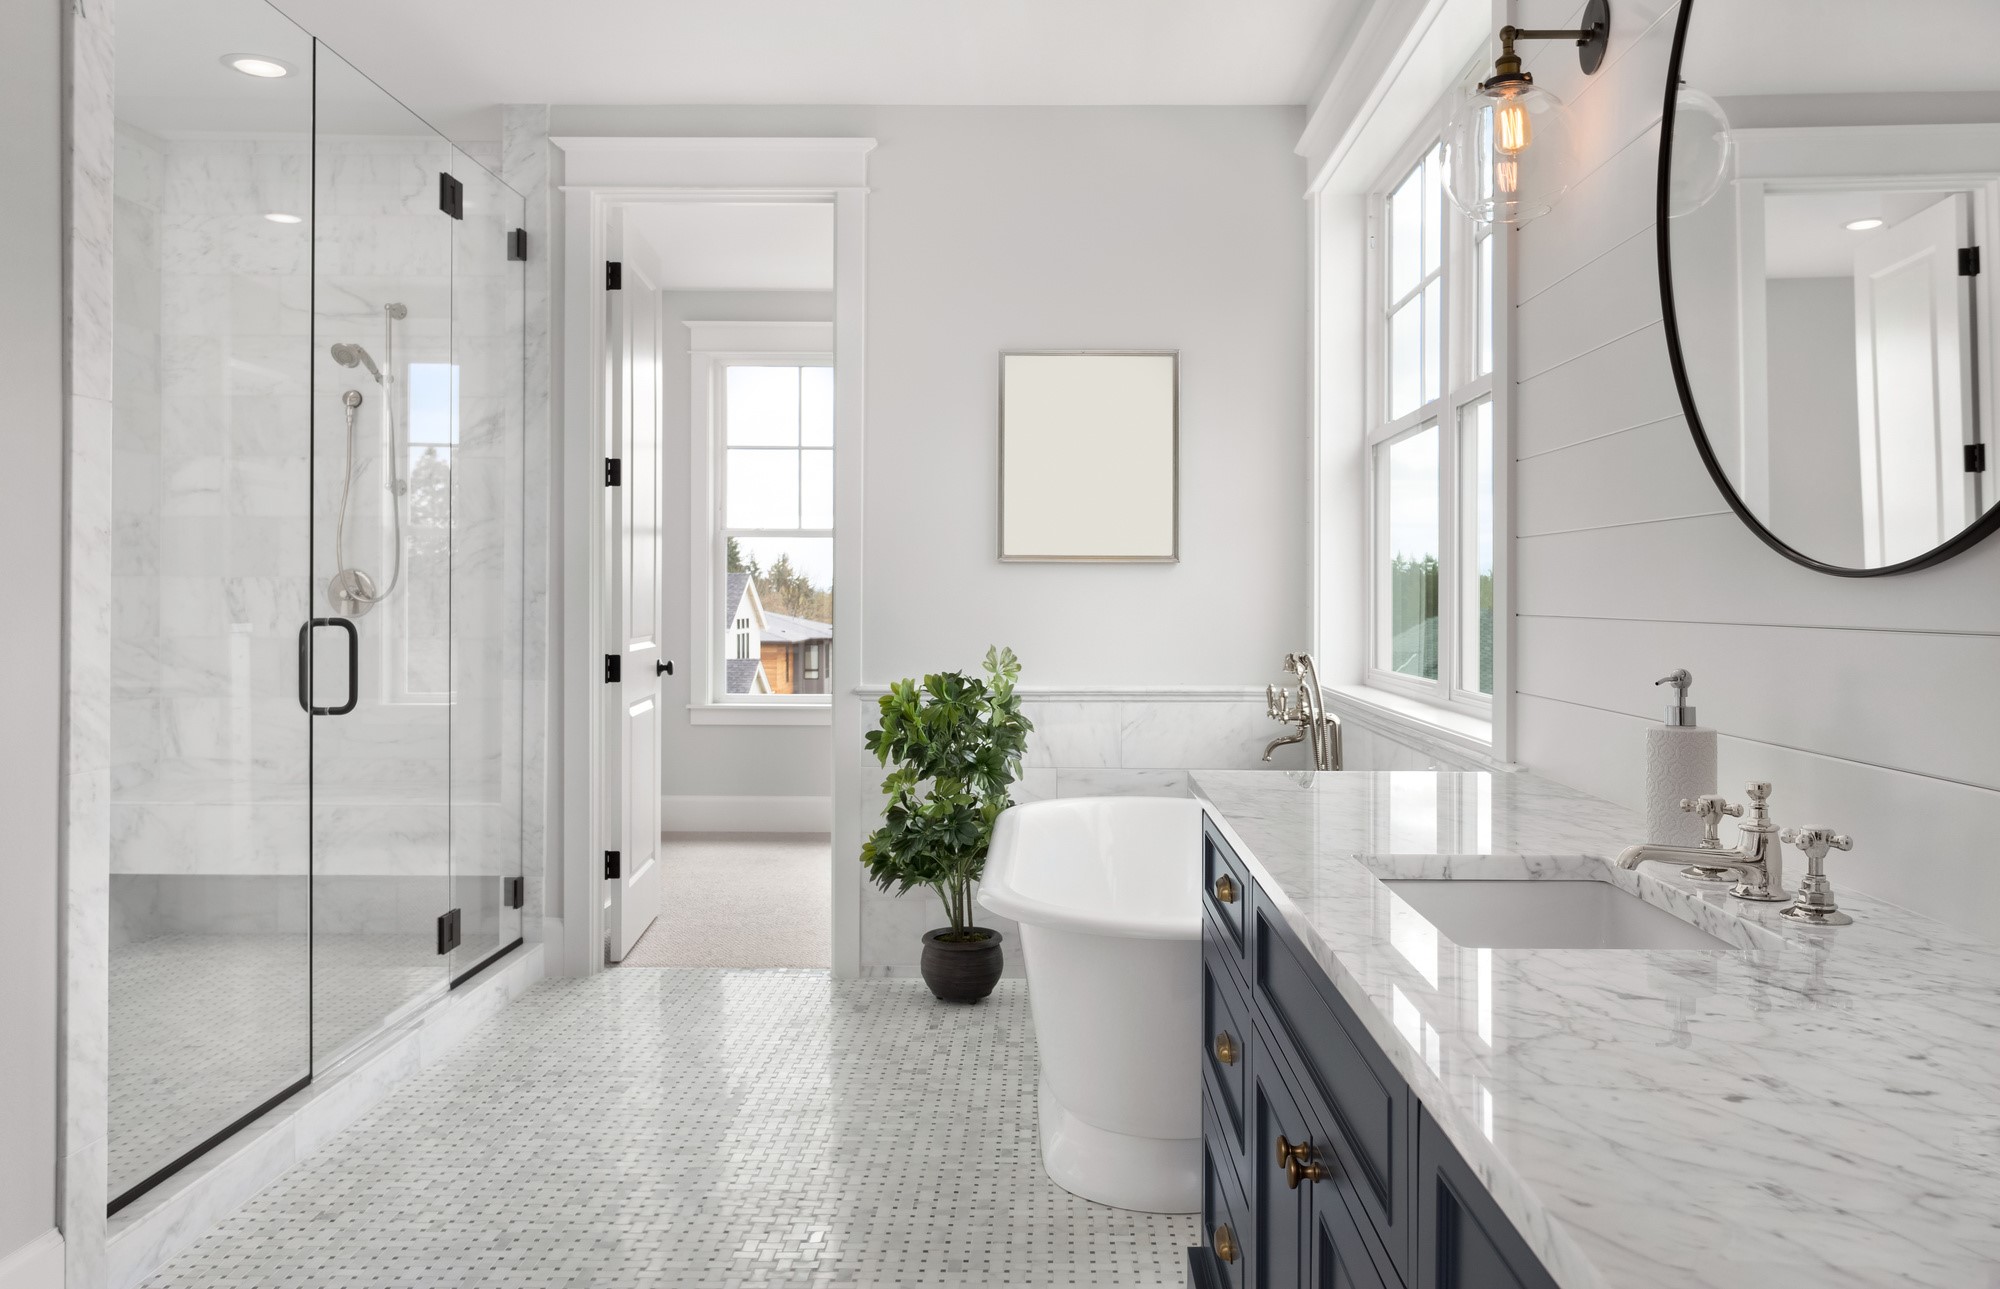 Tips on choosing stone countertops for a bathroom setting